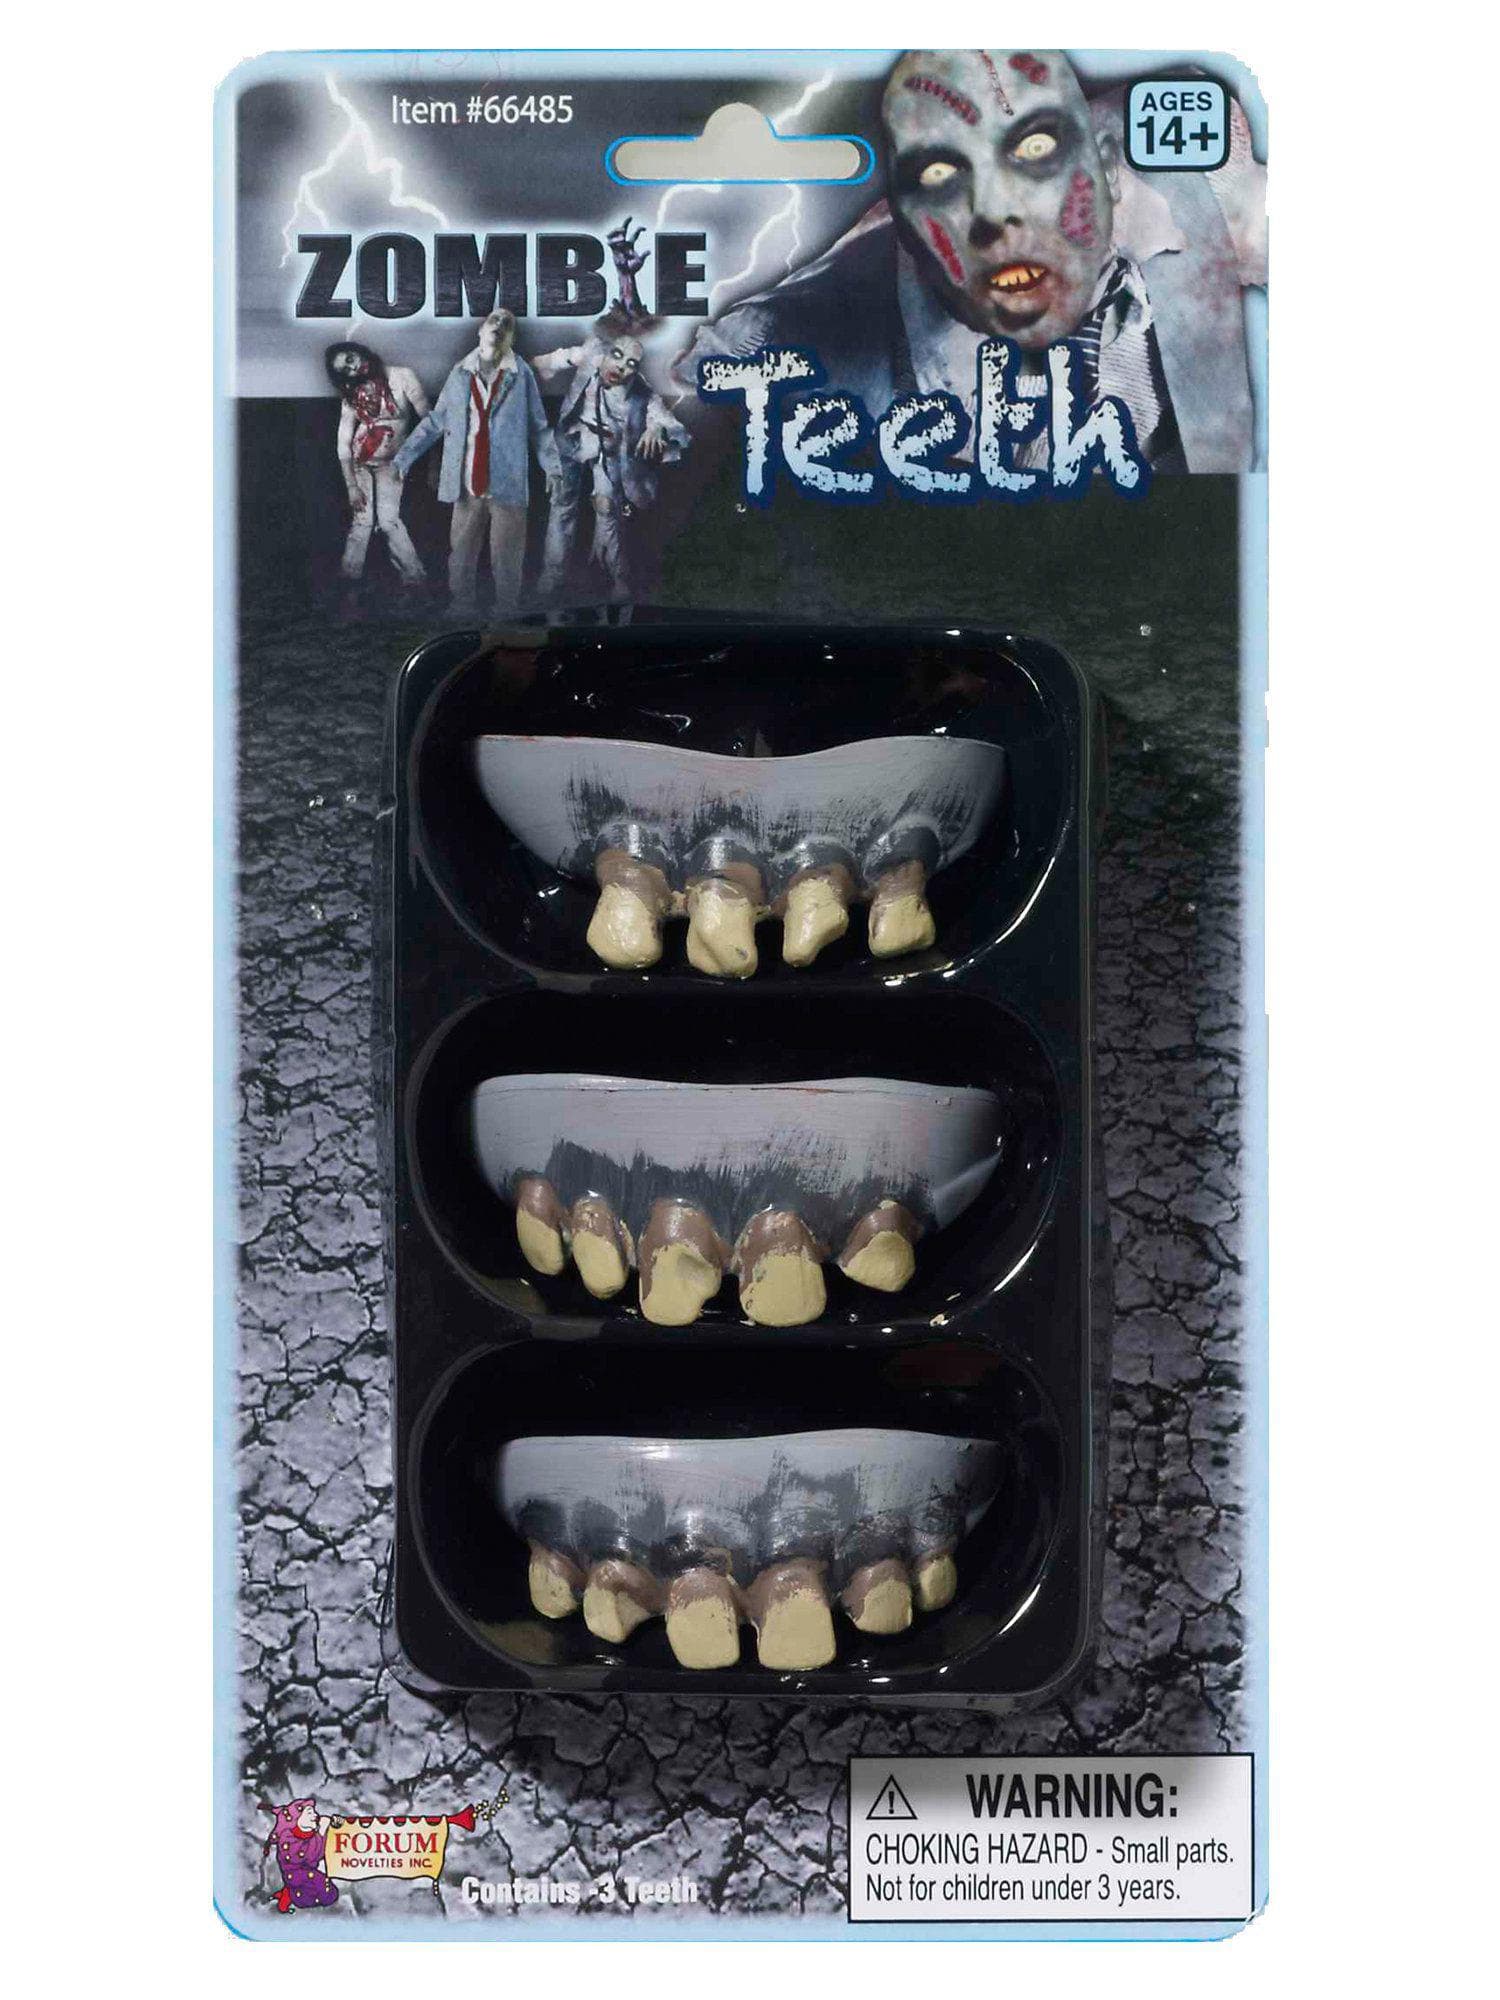 Zombie Rotted Teeth - costumes.com